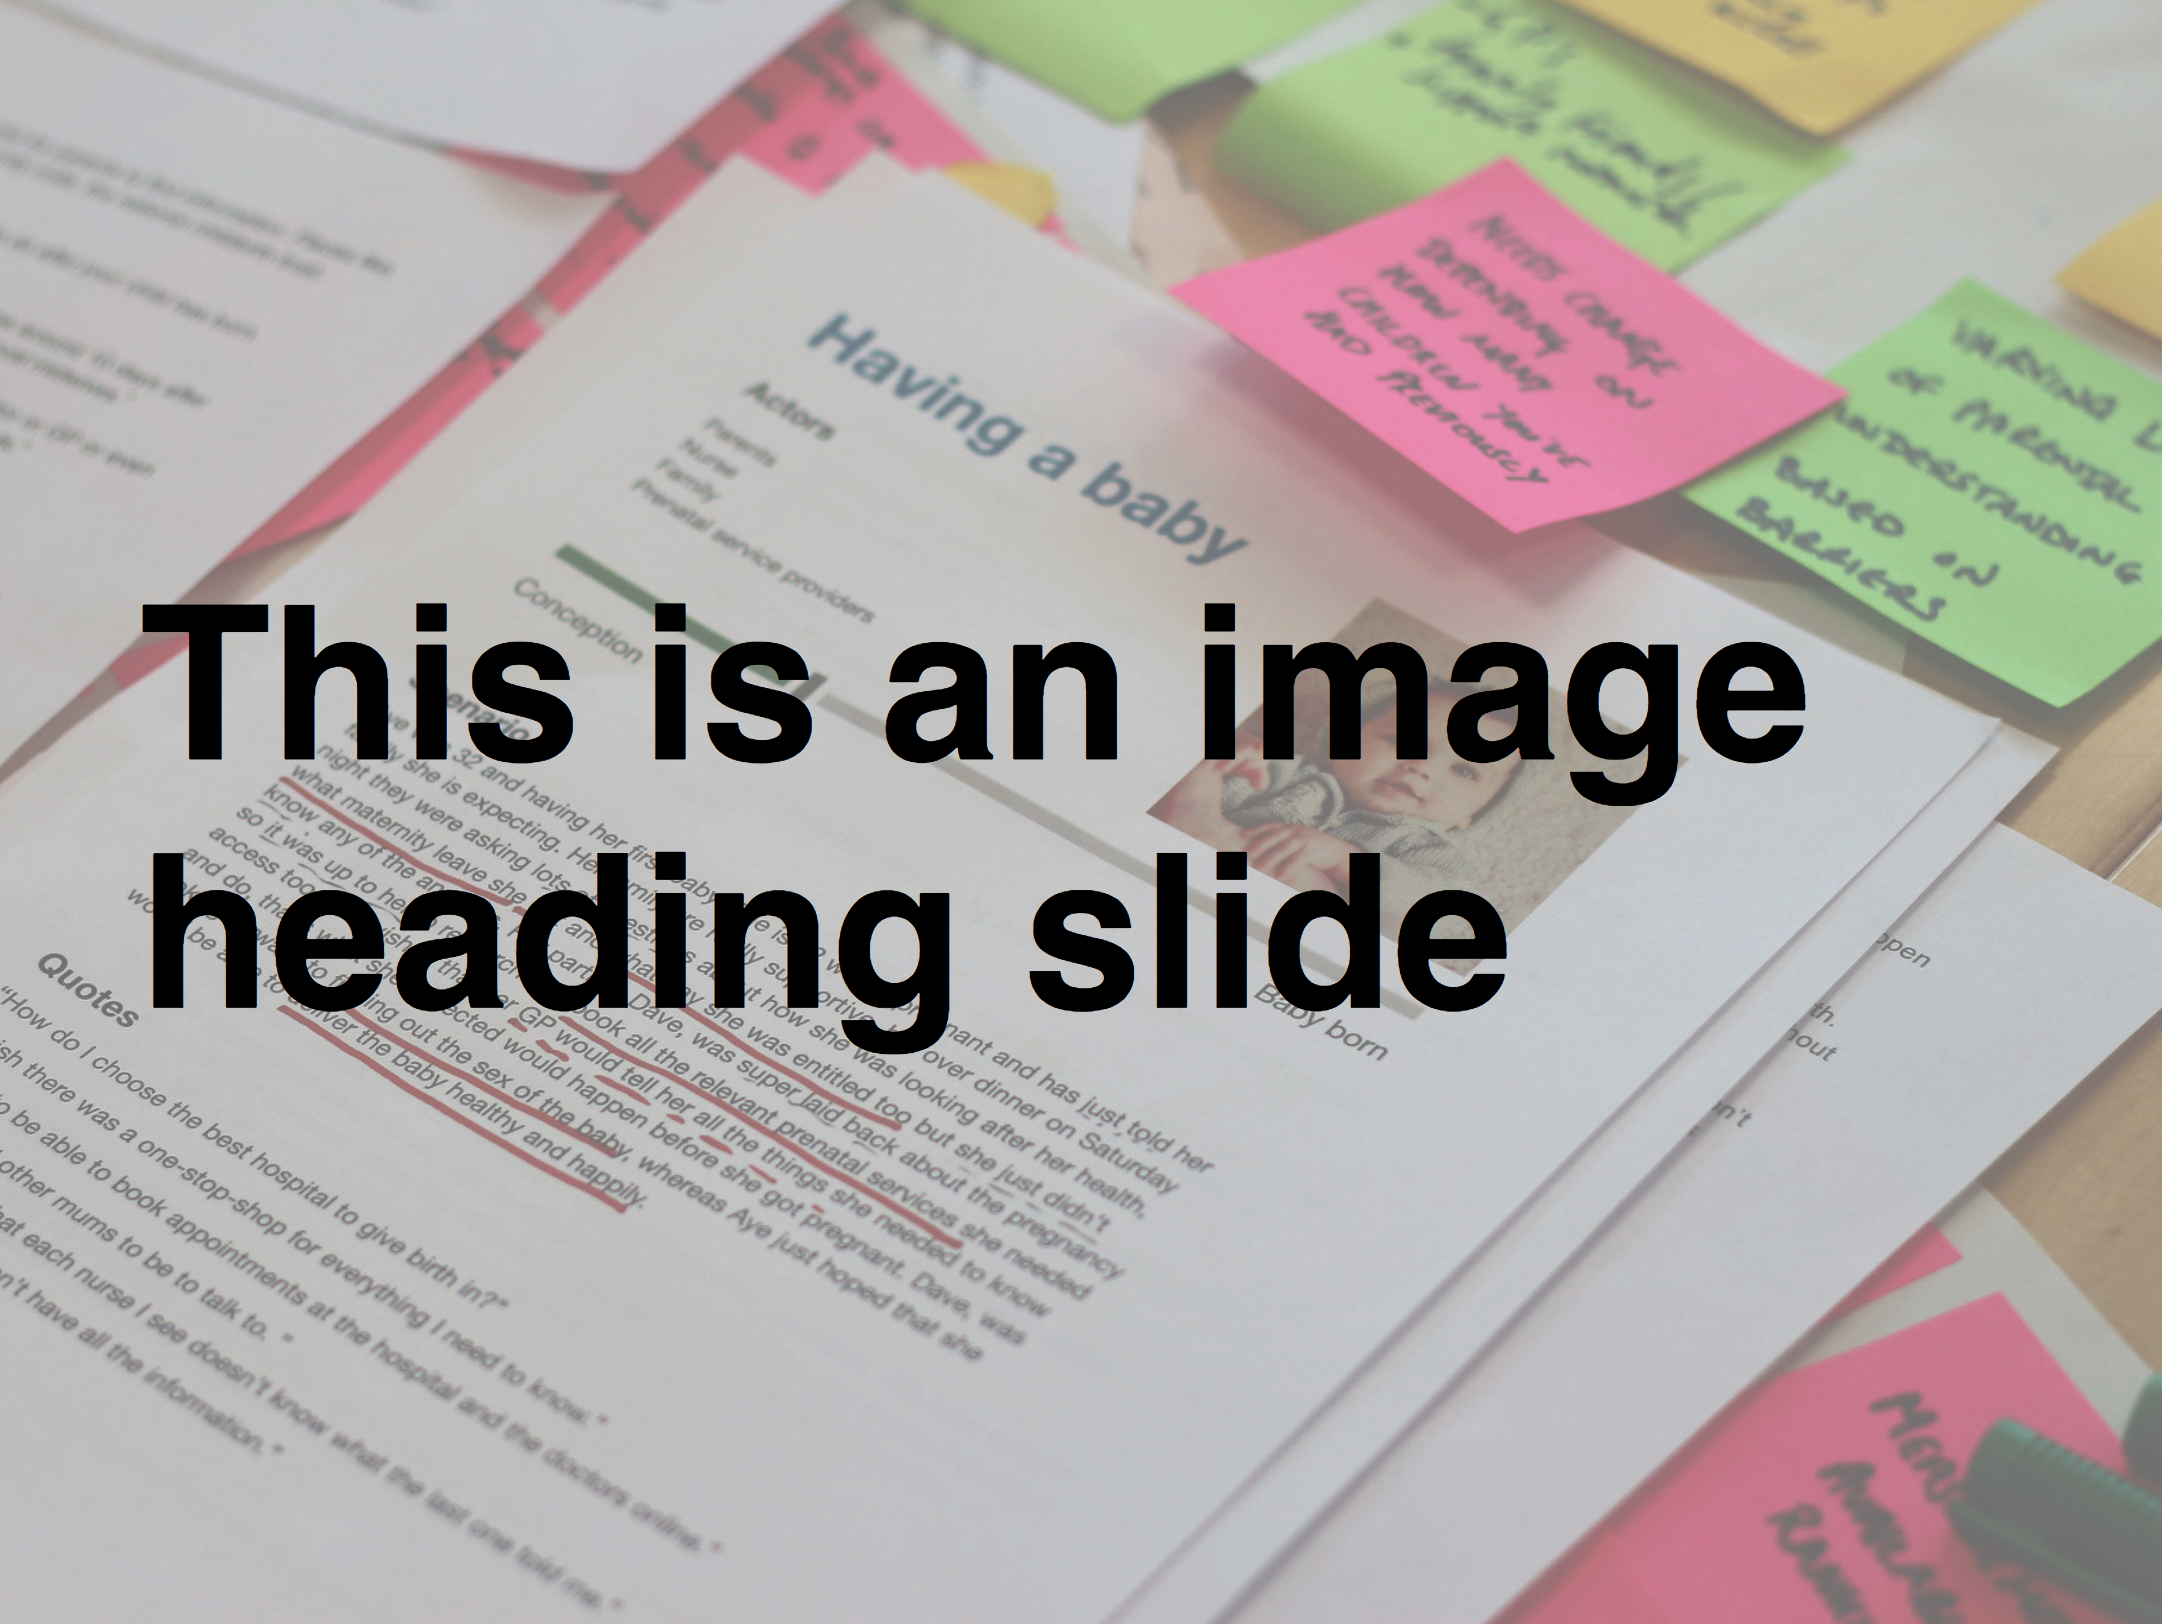 The image heading slide, which has a background image of some documents with large black overlaid text reading 'this is an image heading slide'.